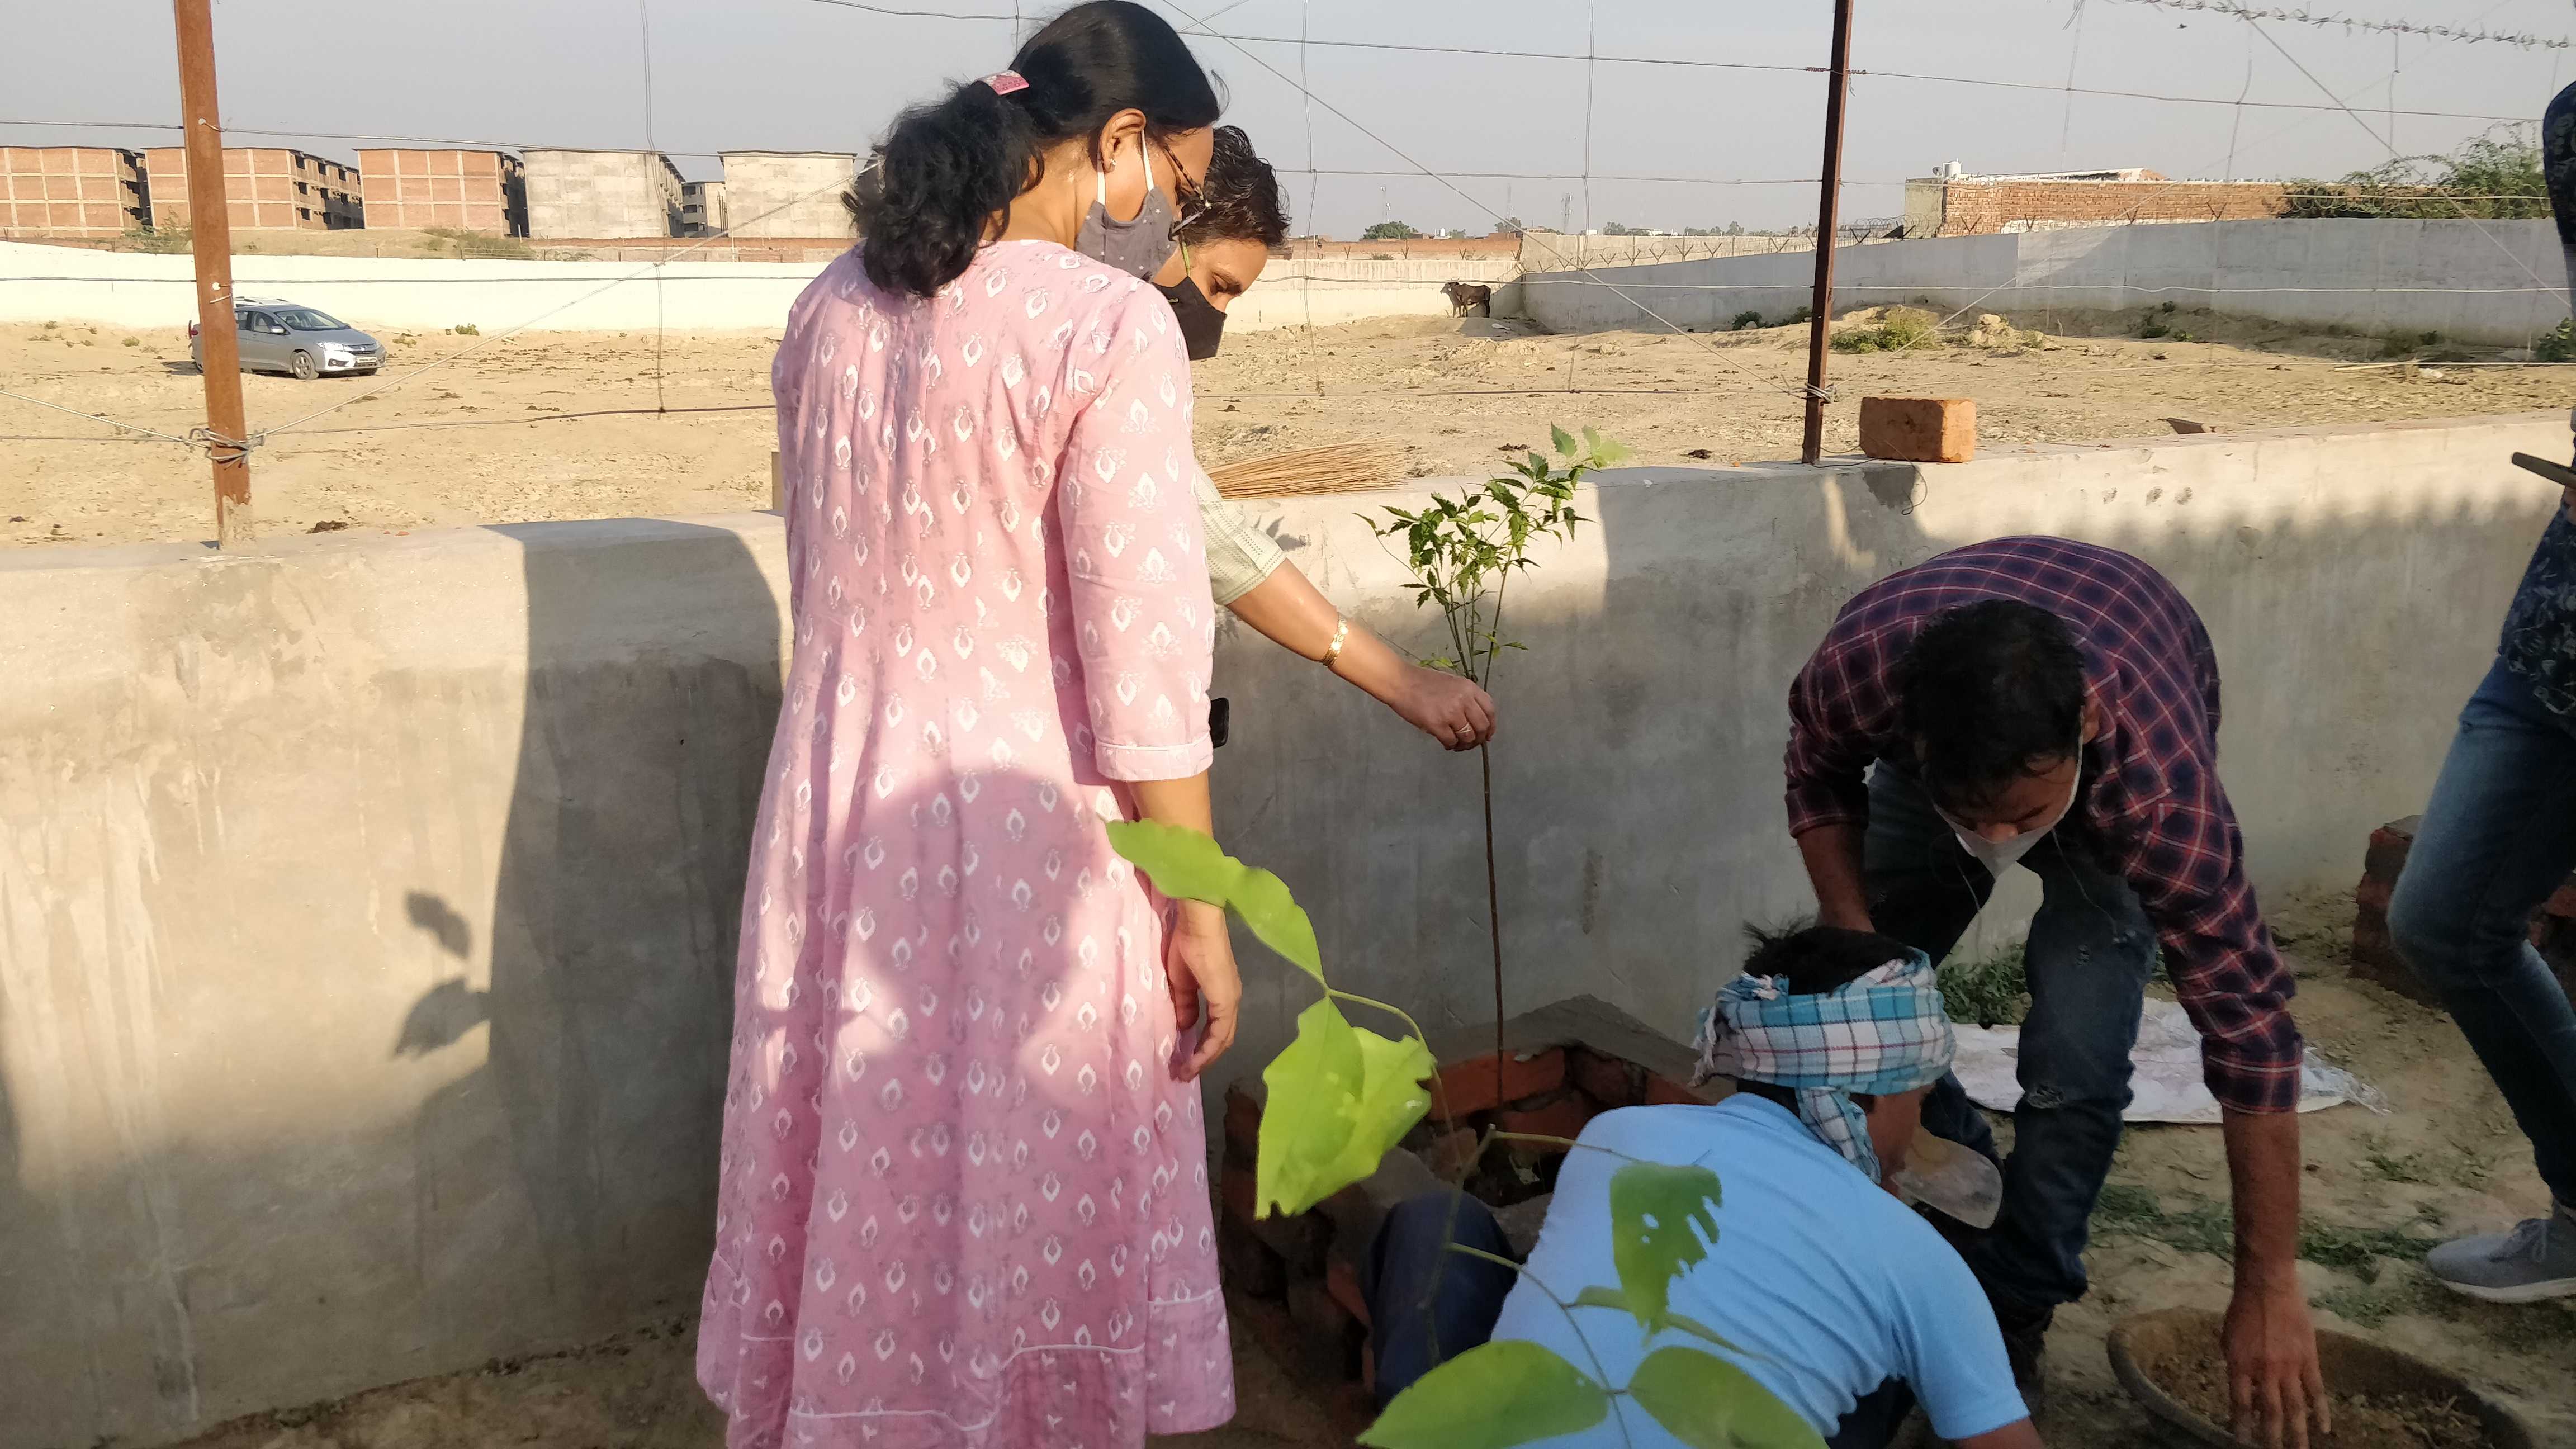 We had a plantation drive at the new shelter premises on 11th October. Dr. Meeta Kulshreshtha of the Unfold Foundation was kind enough to donate the trees and oversee the plantation. the team from Ek Kartavya joined us for the "shram daan".